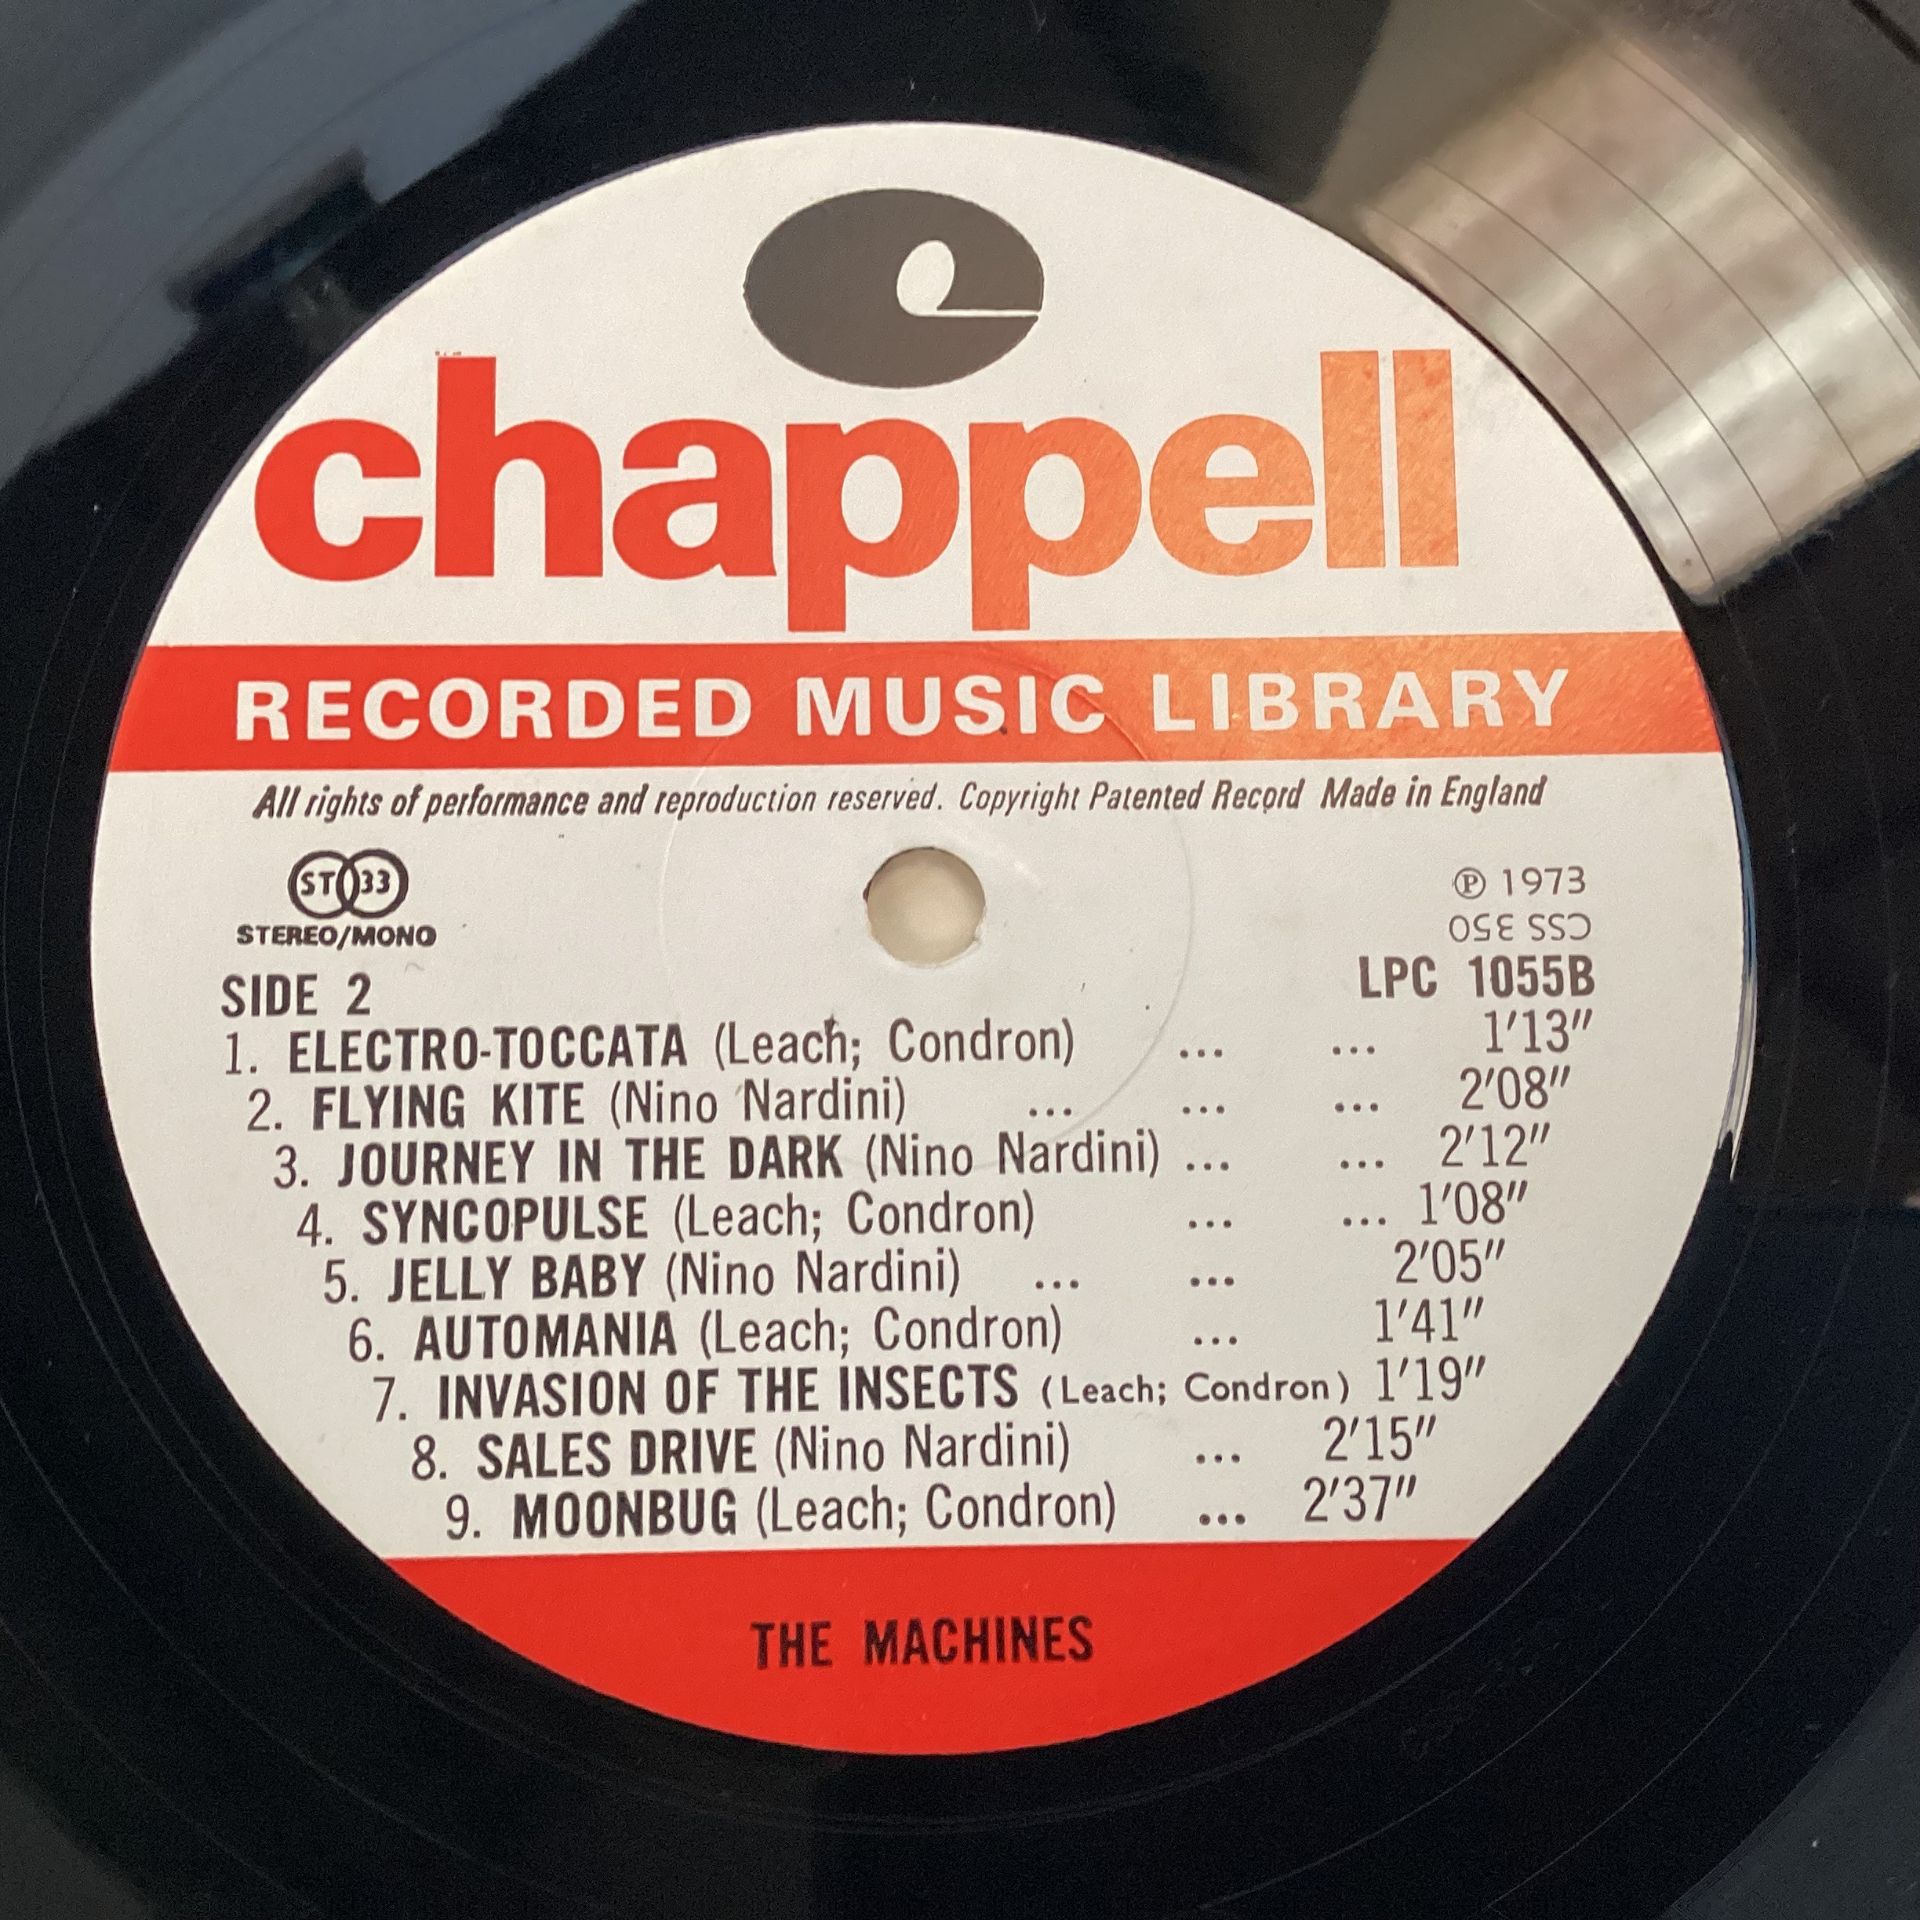 ELECTRONIC MUSIC VINYL LP RECORD. This vinyl is on Chappell Records No. LPC 1055 released in 1973 - Image 3 of 4